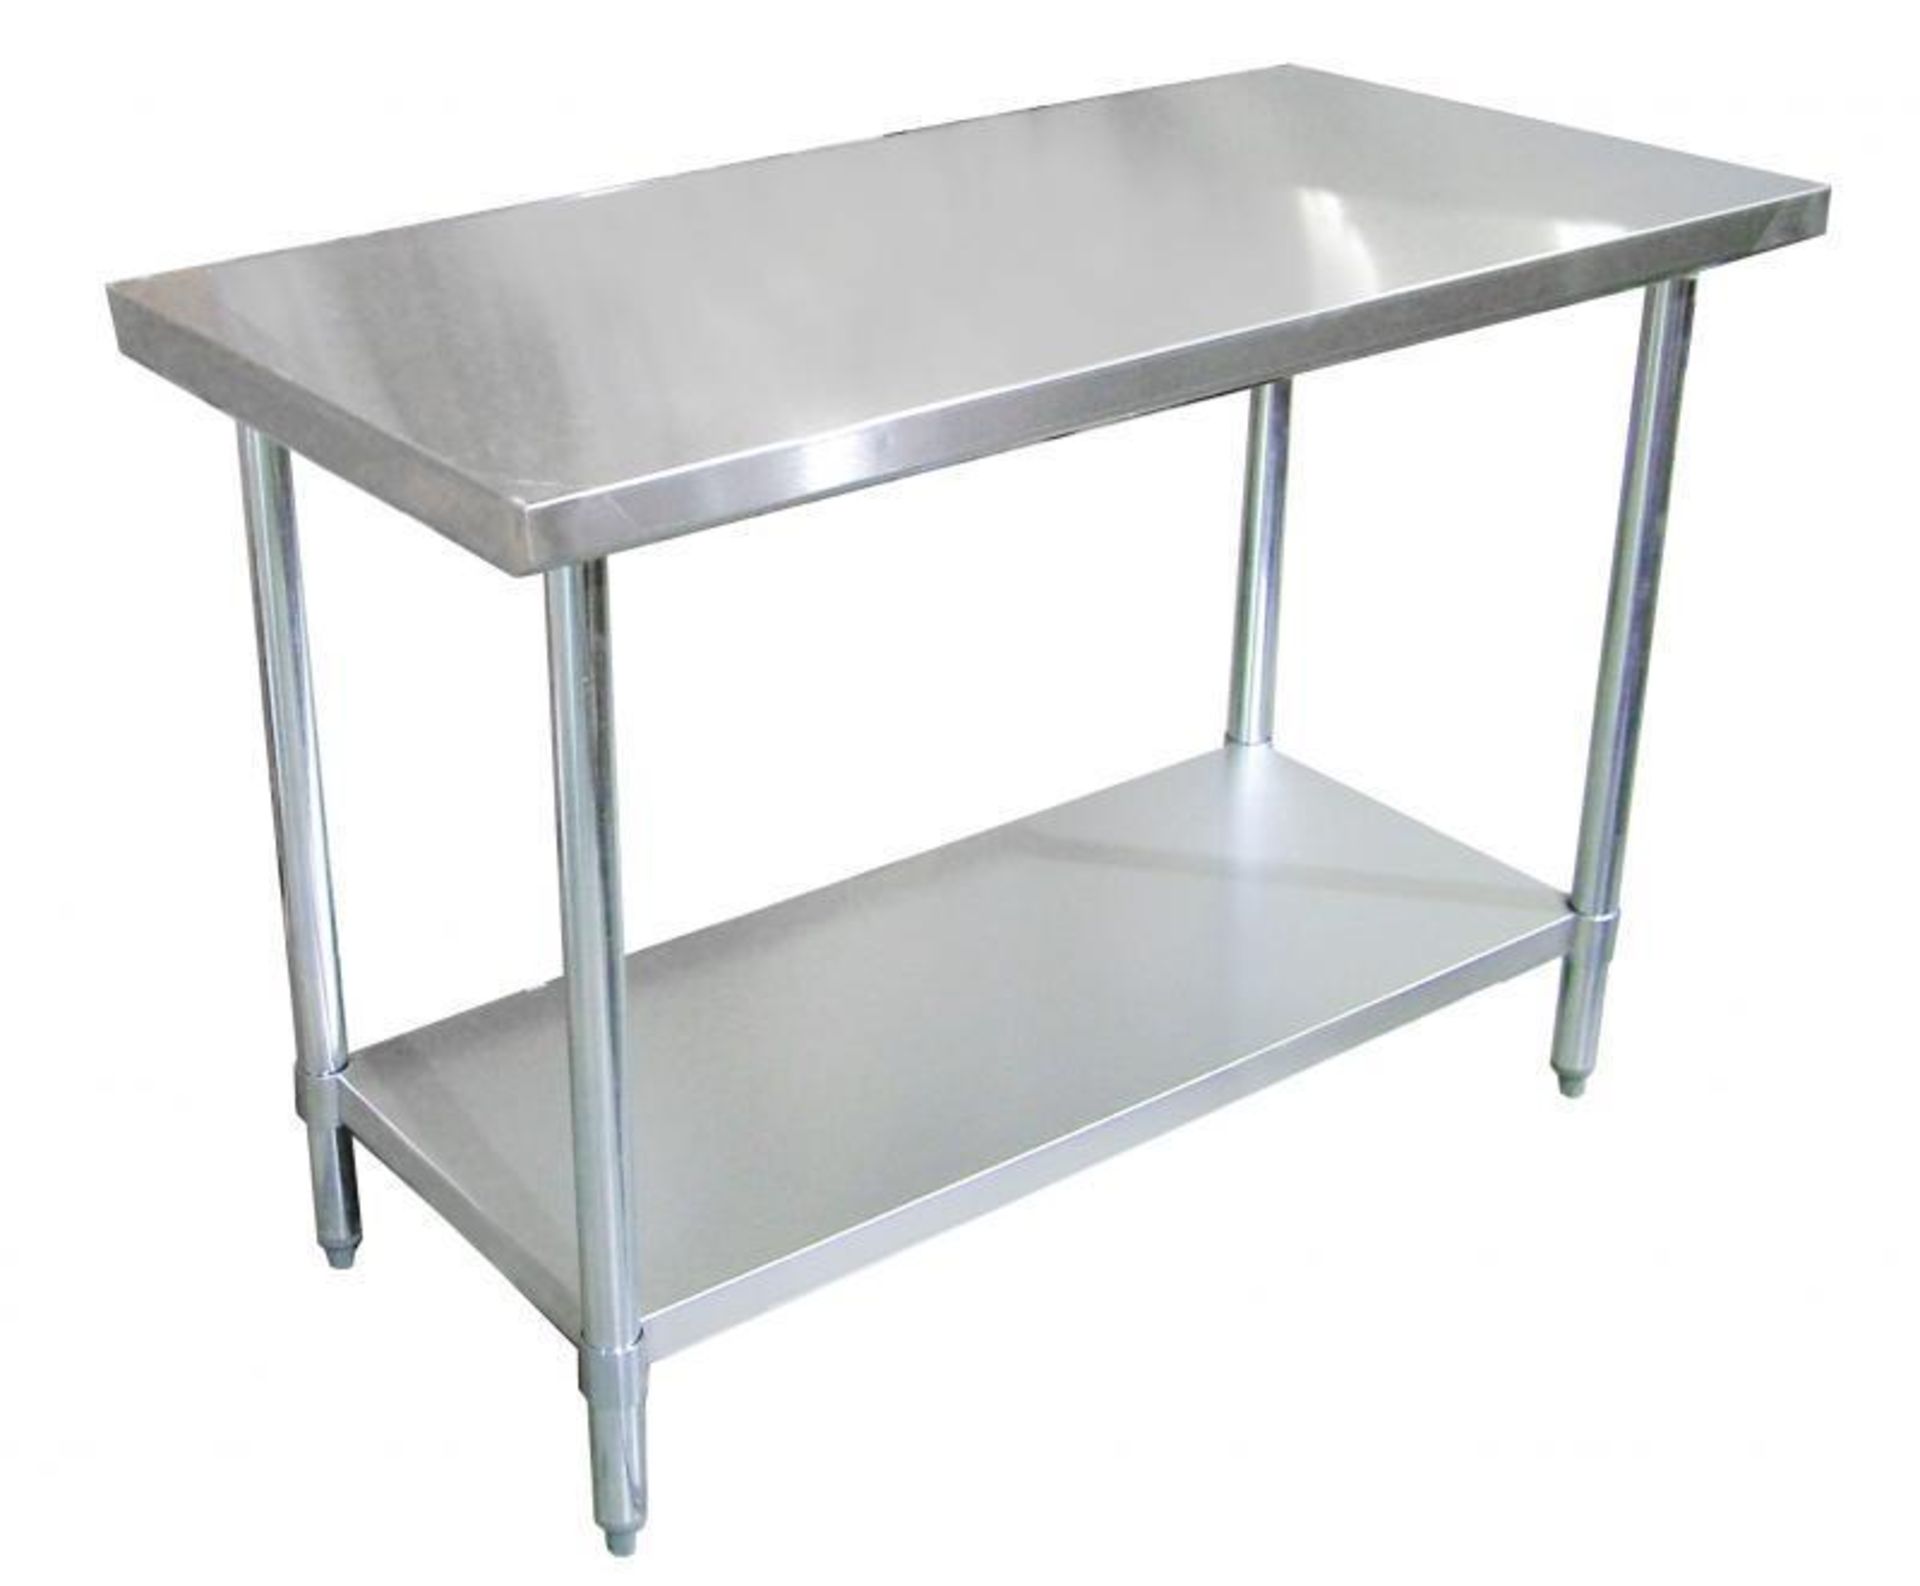 NEW 30" X 36" STAINLESS STEEL WORK TABLE